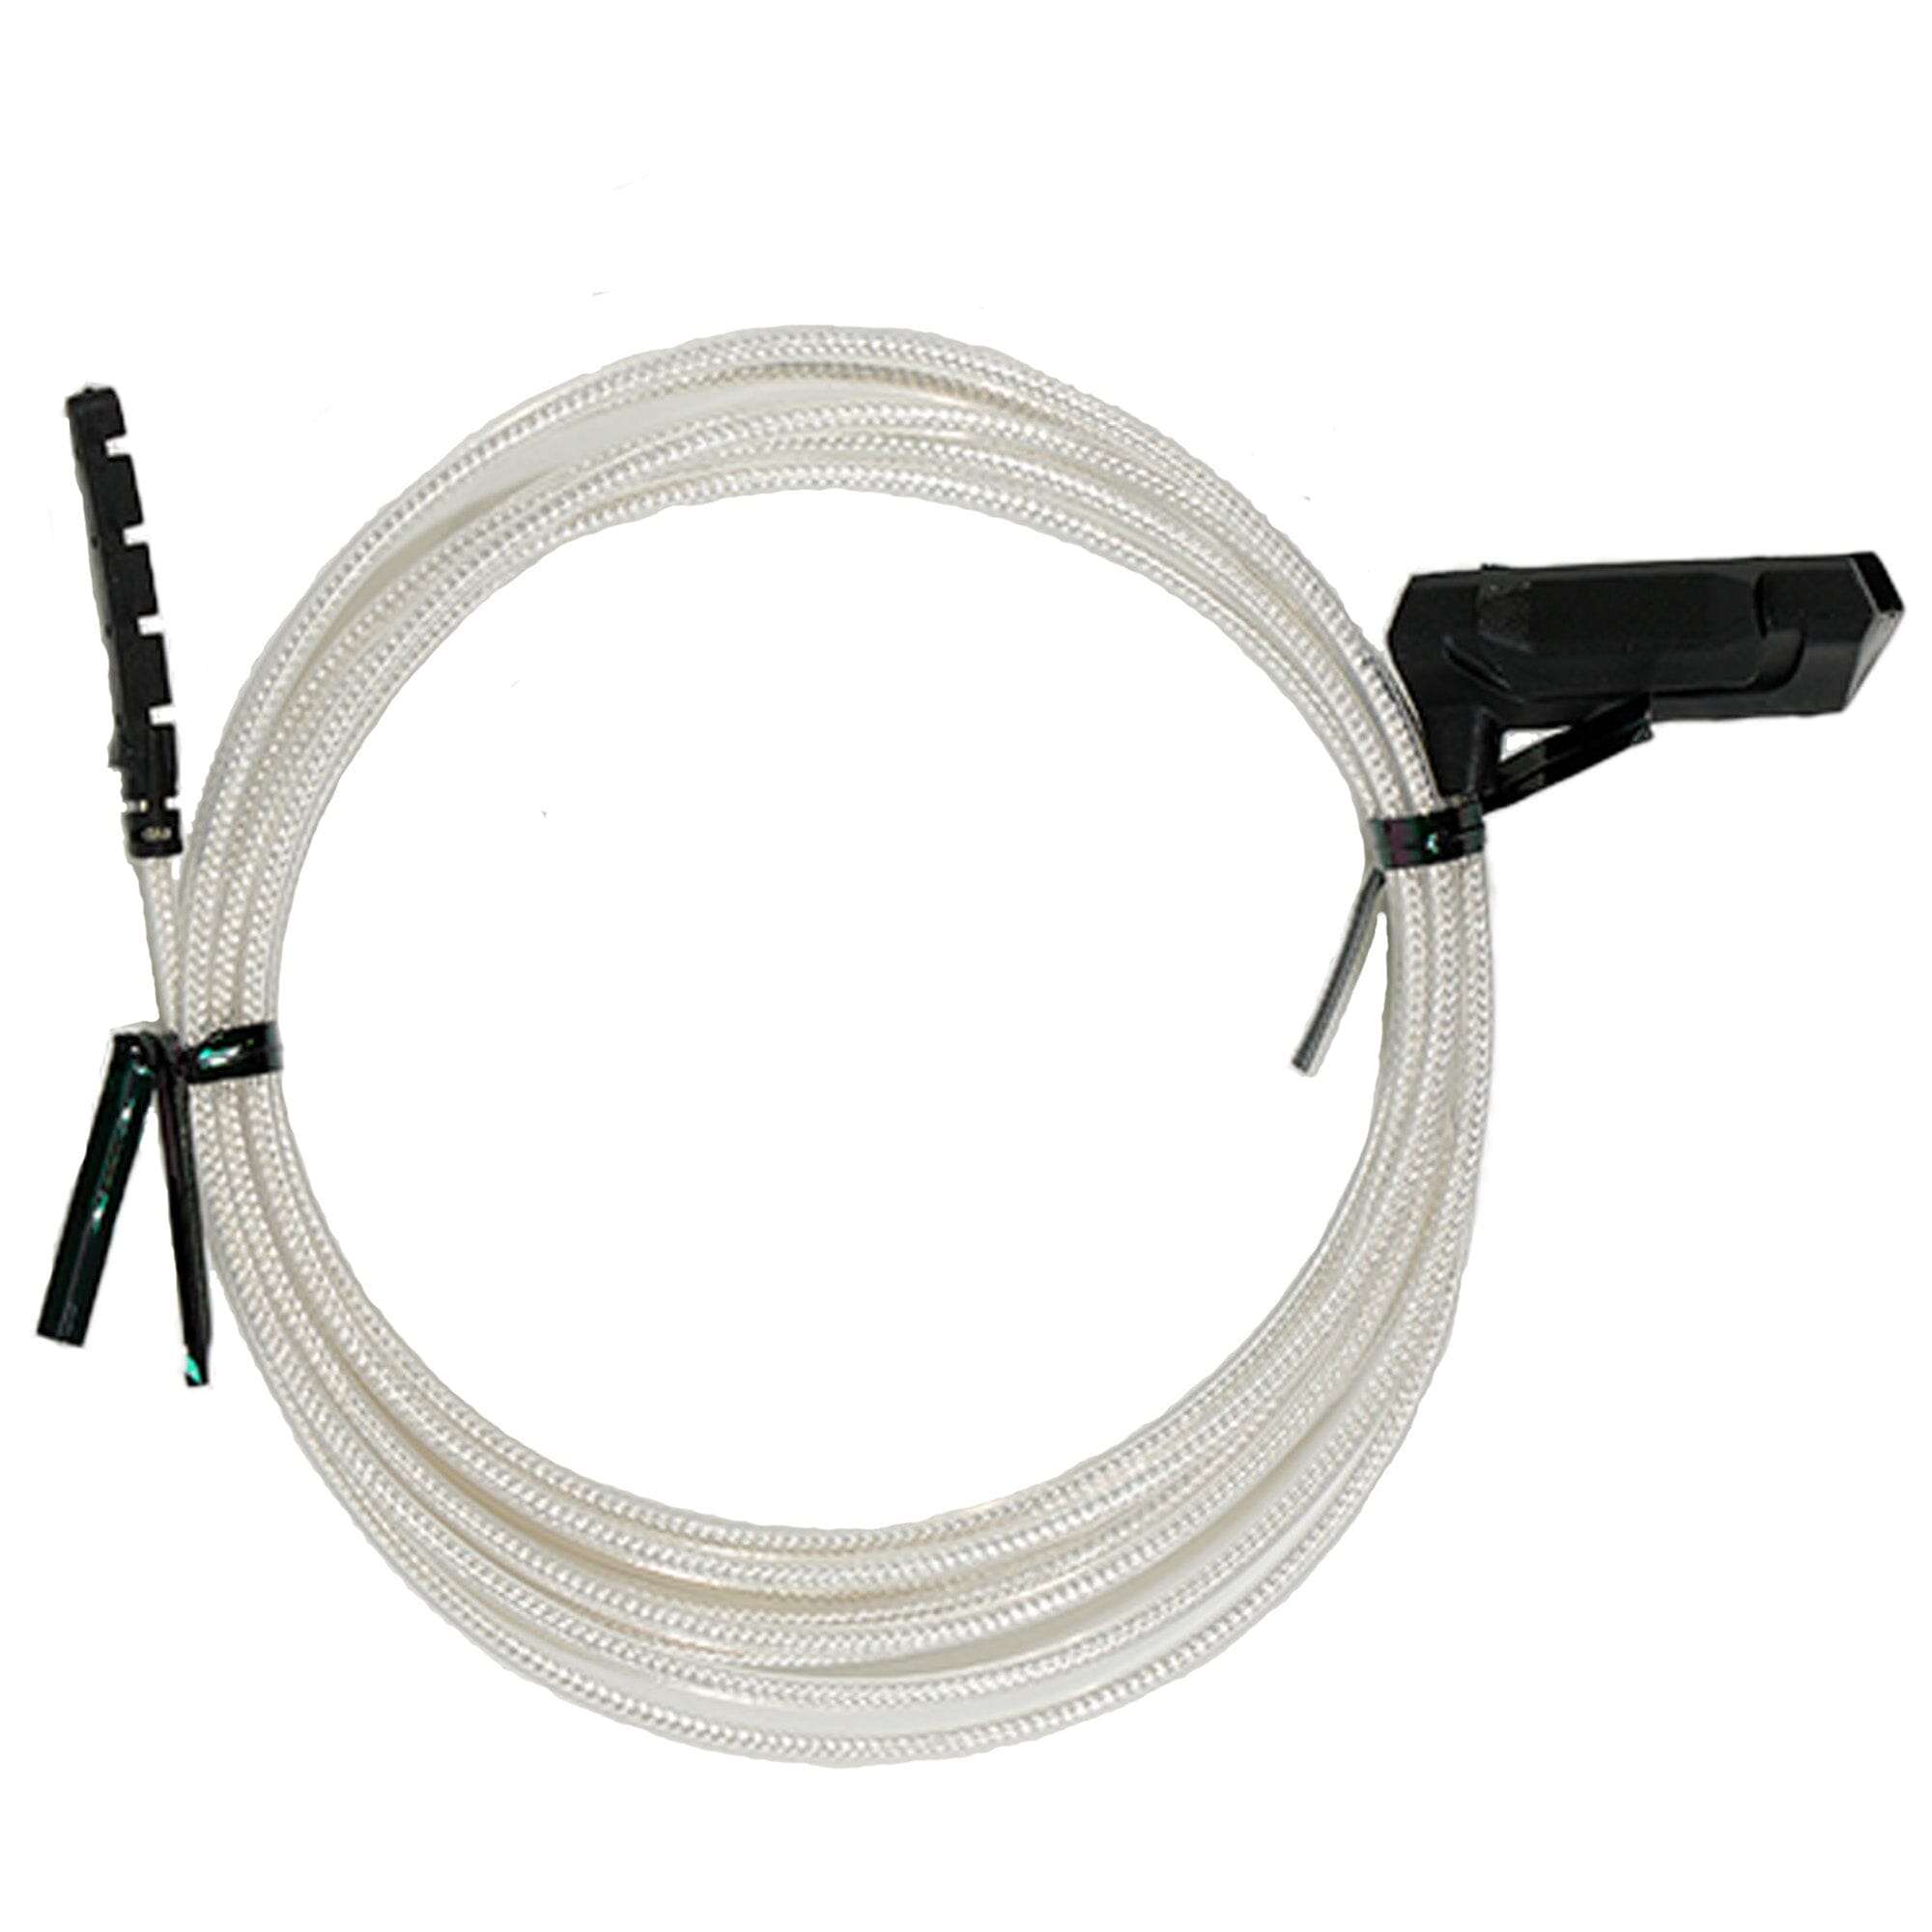 DEUS II Aerial Antenna with 250cm Cable